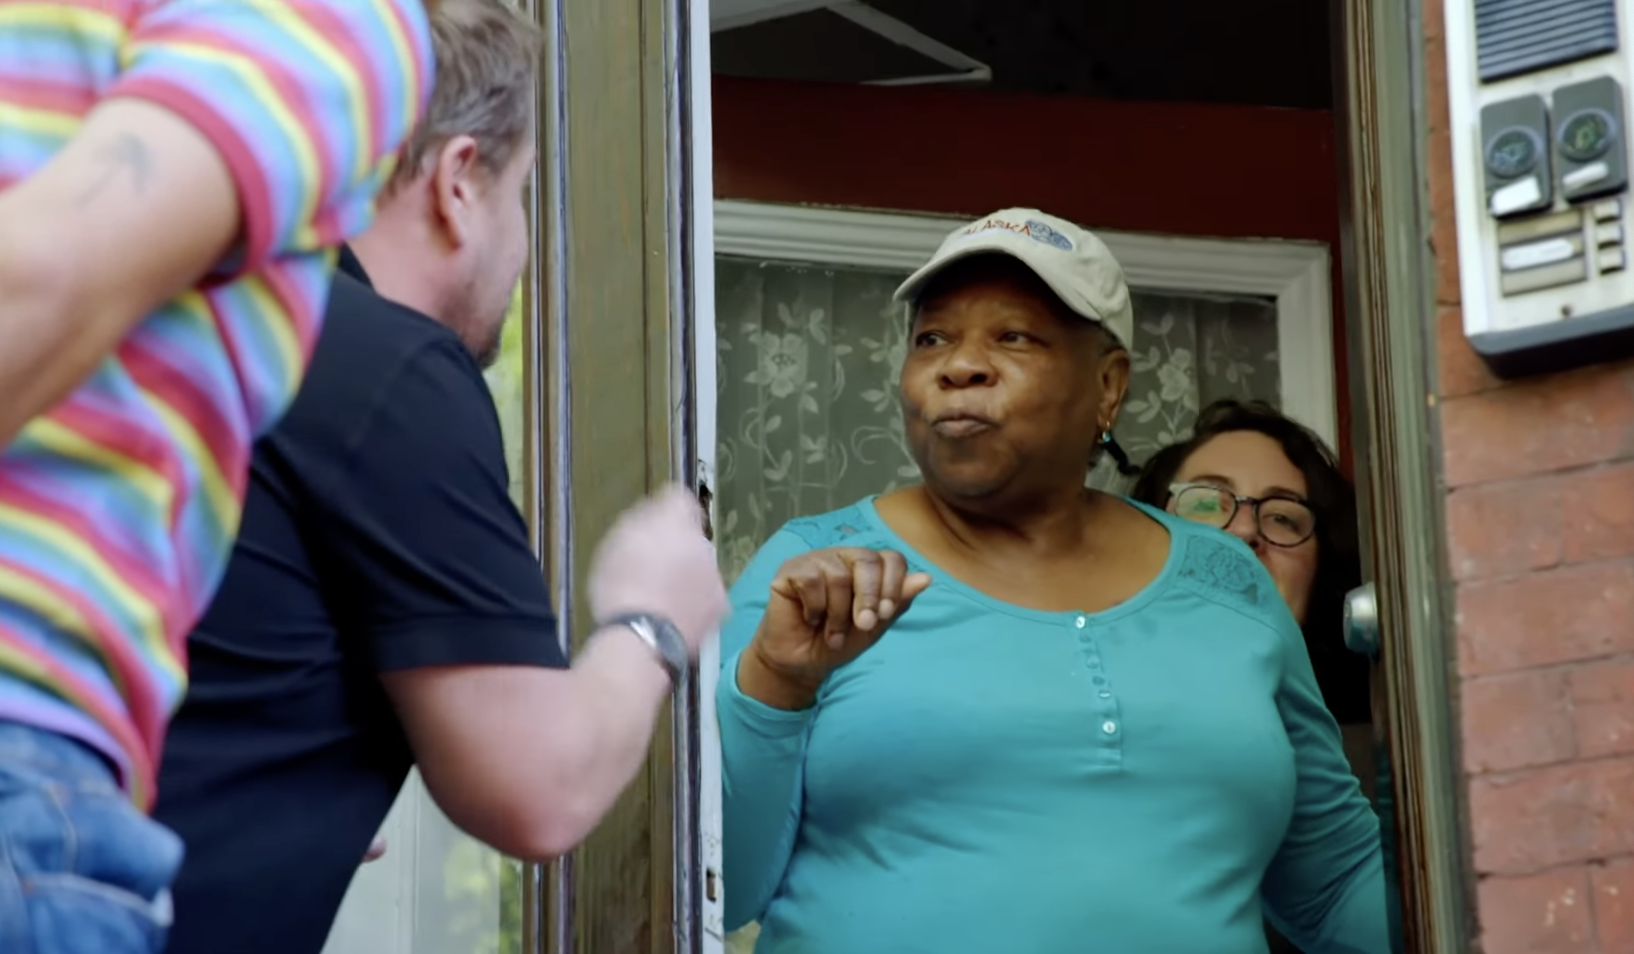 Corden and Styles lean forward at a stranger&#x27;s door, where an older woman looks on quizzically